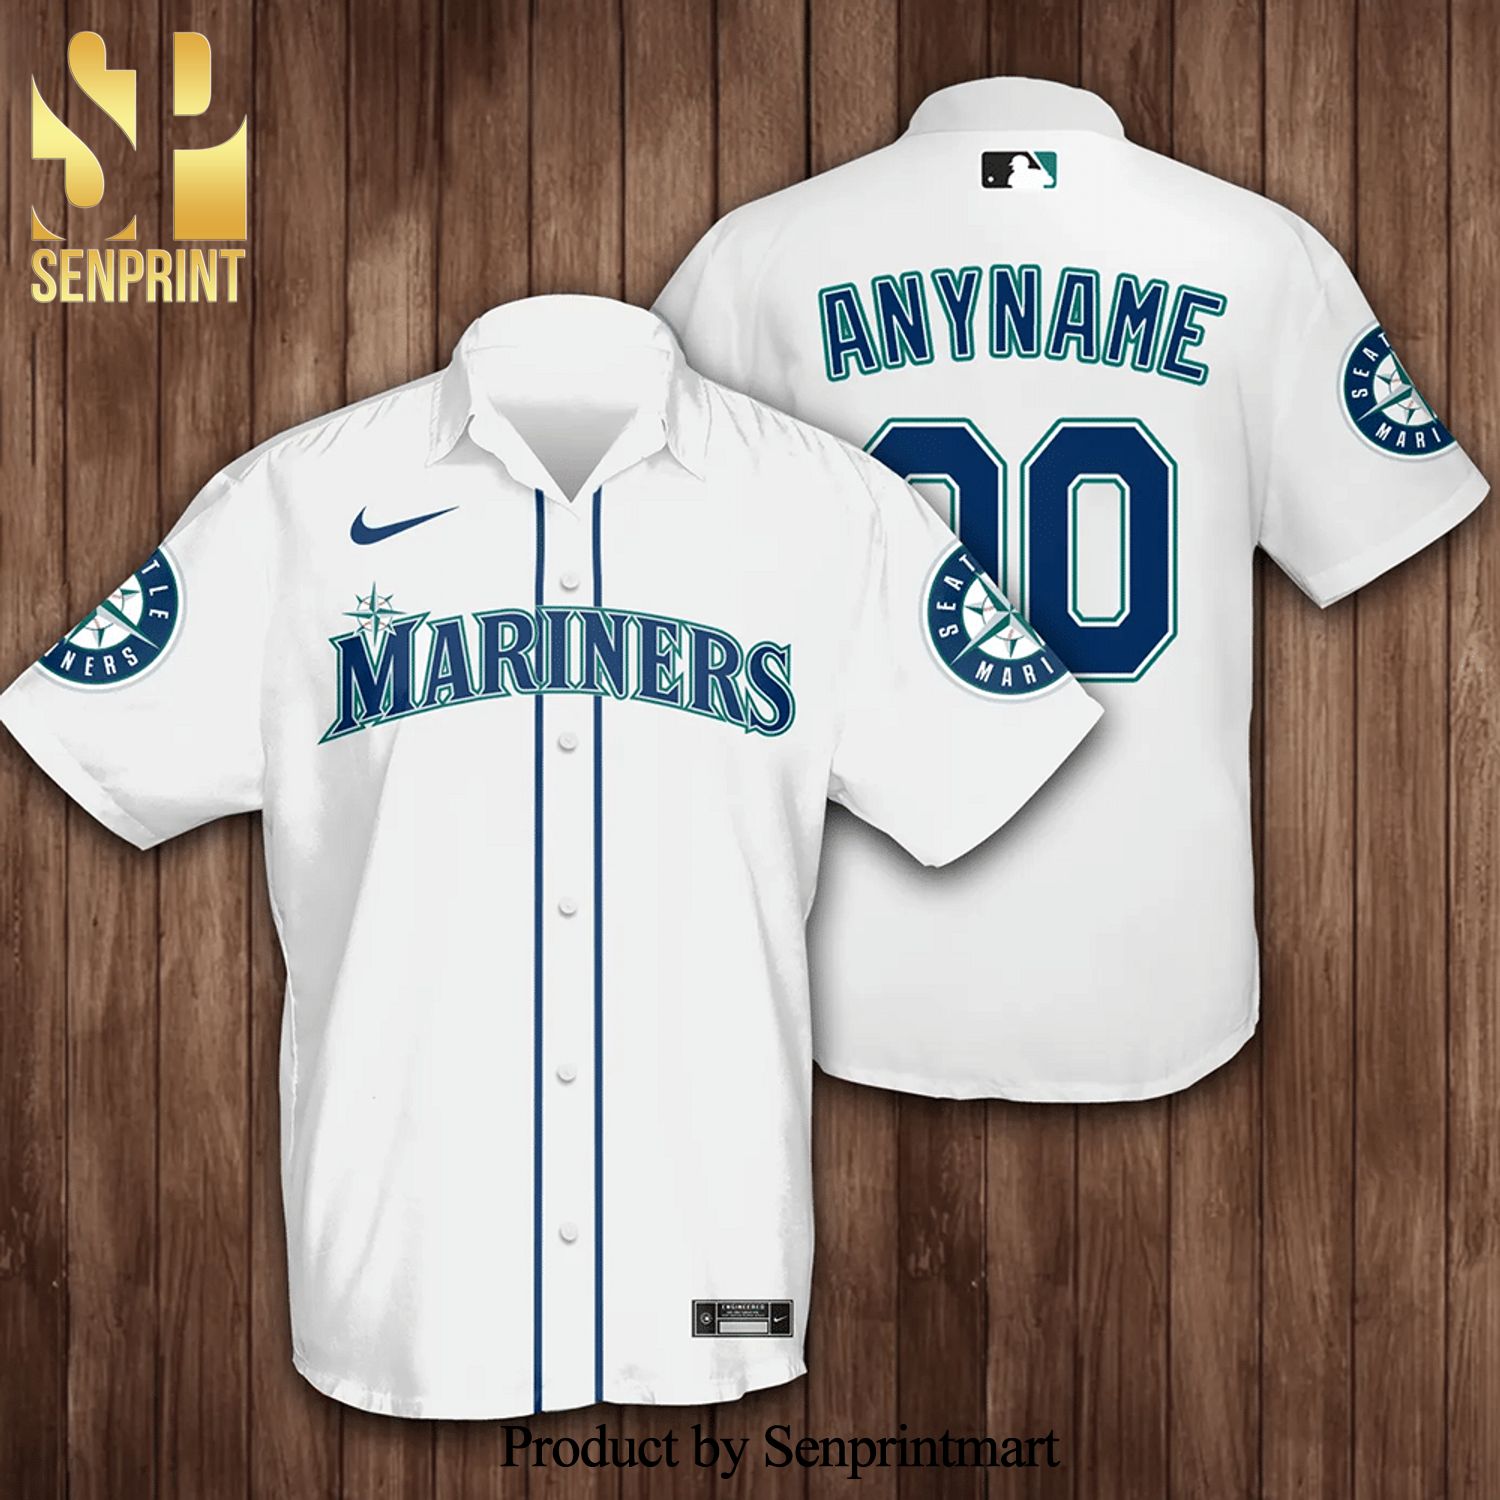 personalized mariners jersey